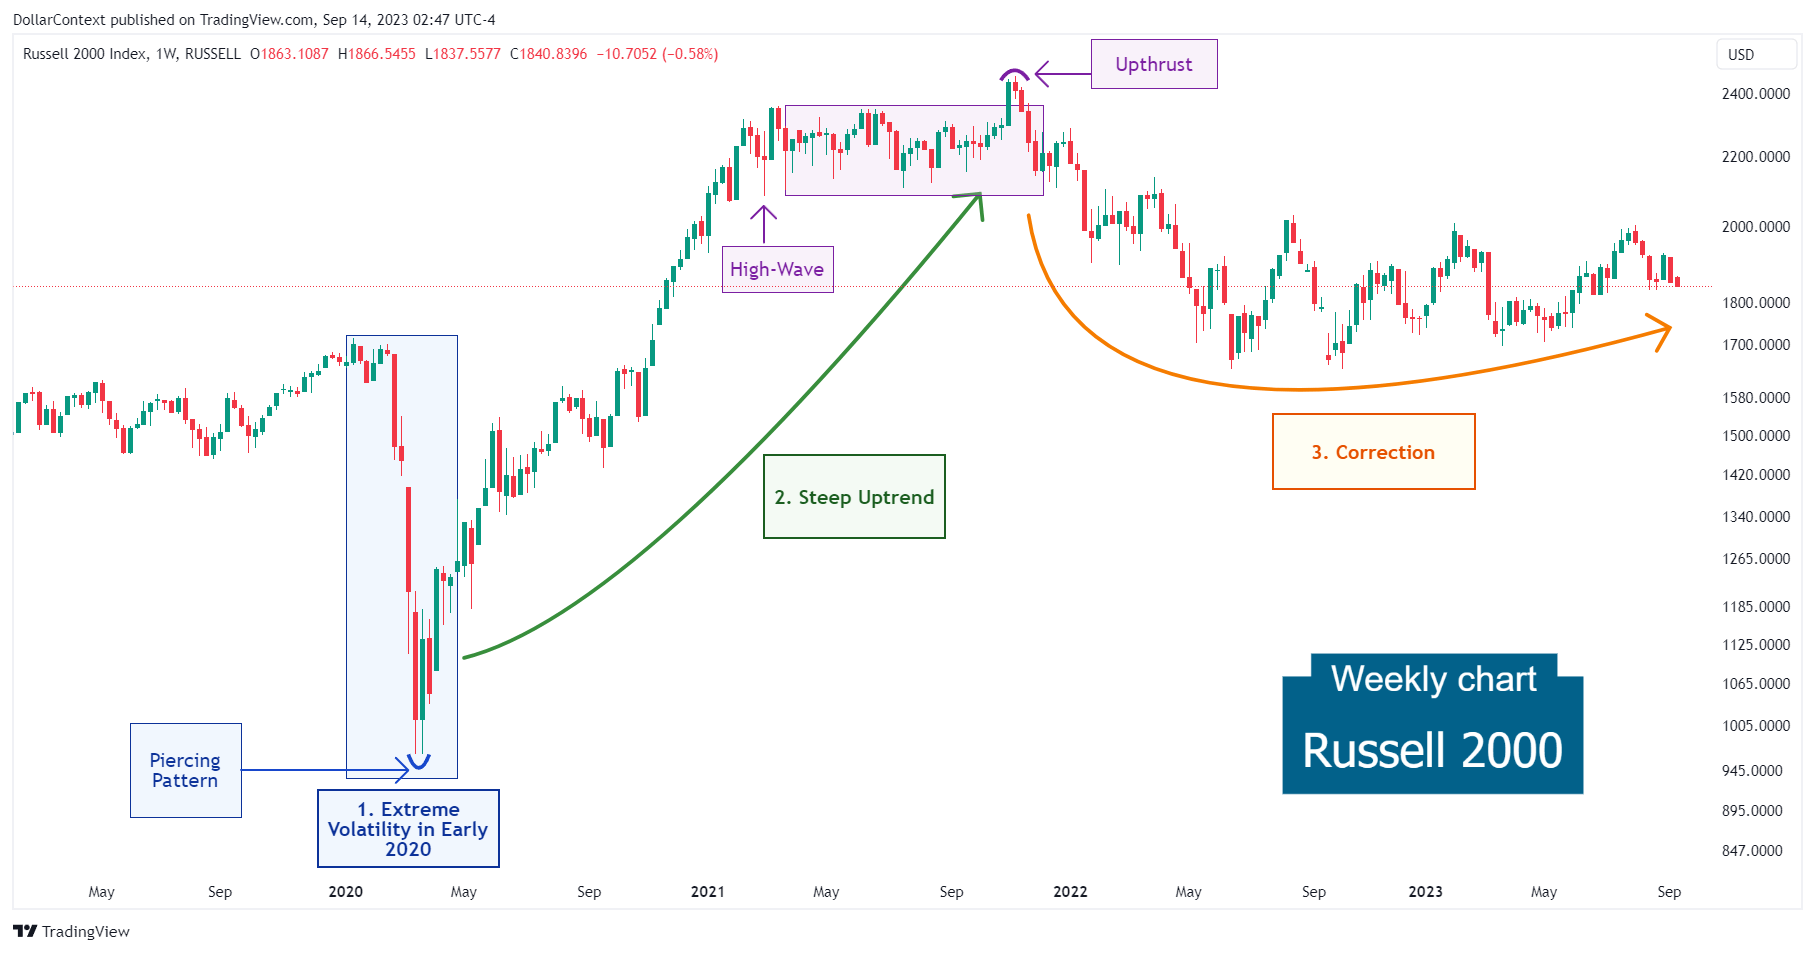 Russell 200: The Correction Since December 2021 (Weekly Chart)